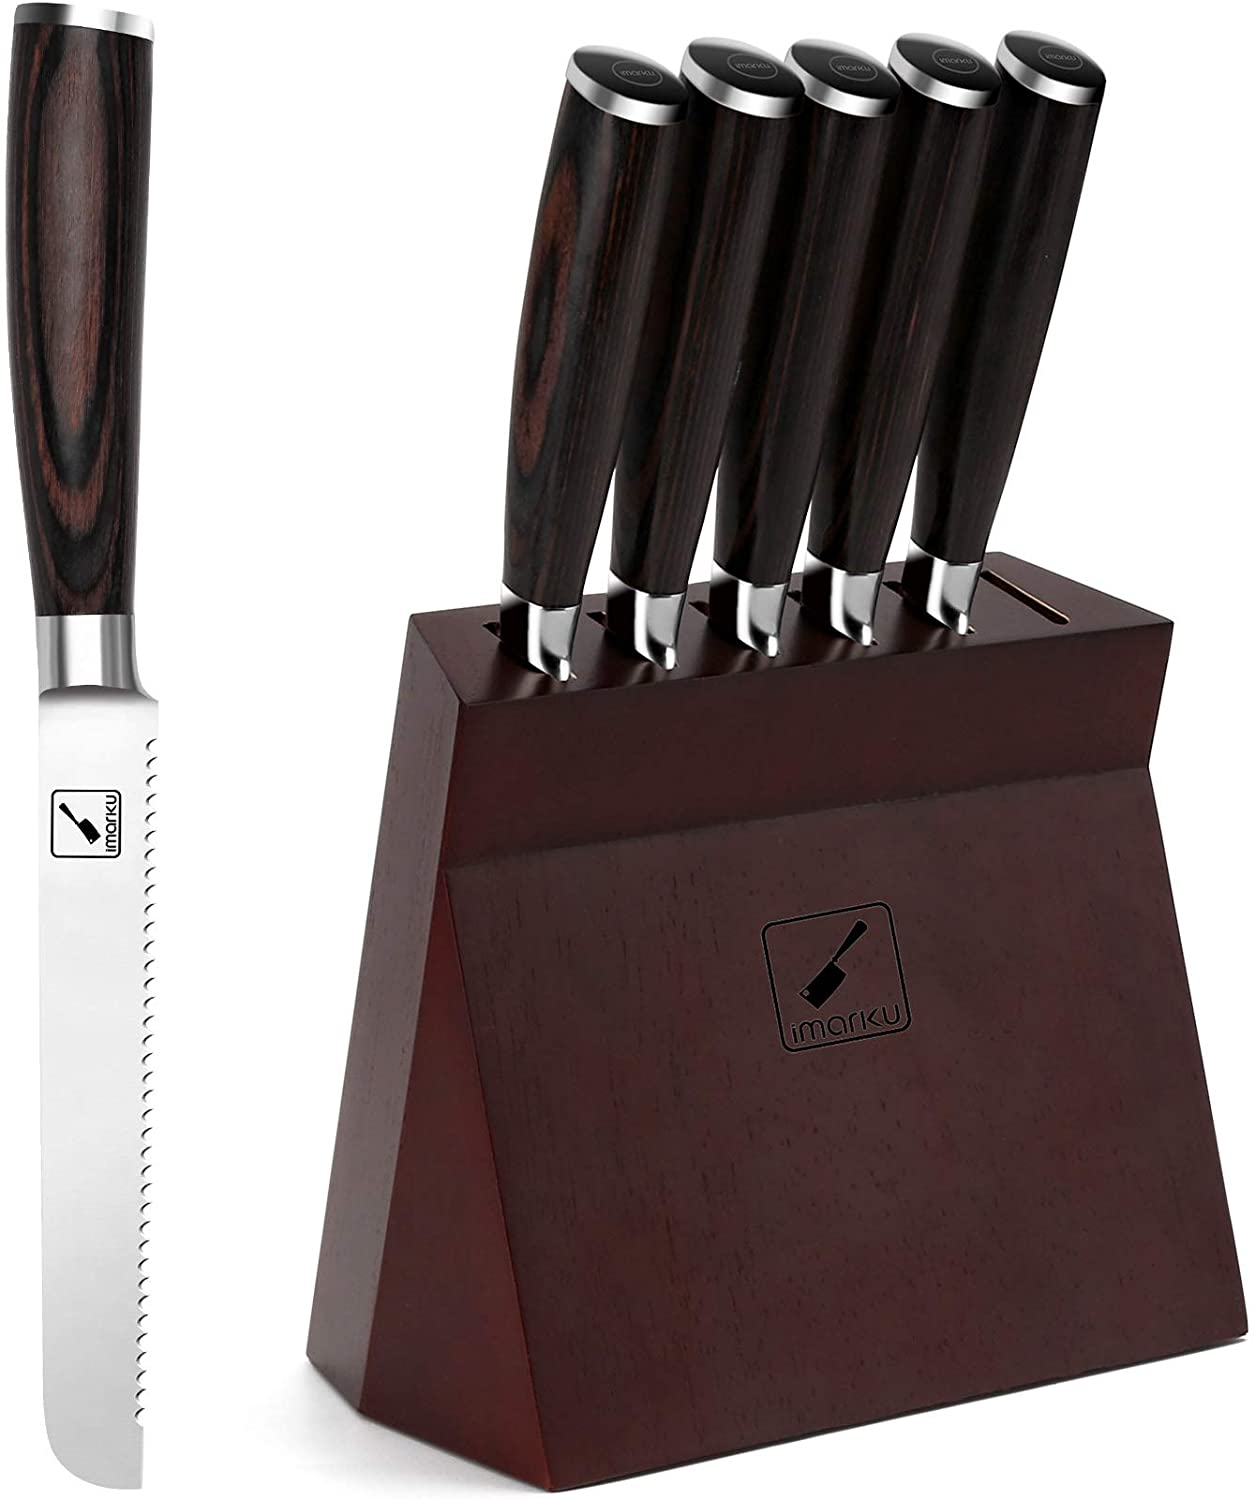 Wanbasion Black Stainless Steel Serrated Steak Knives Set of 8